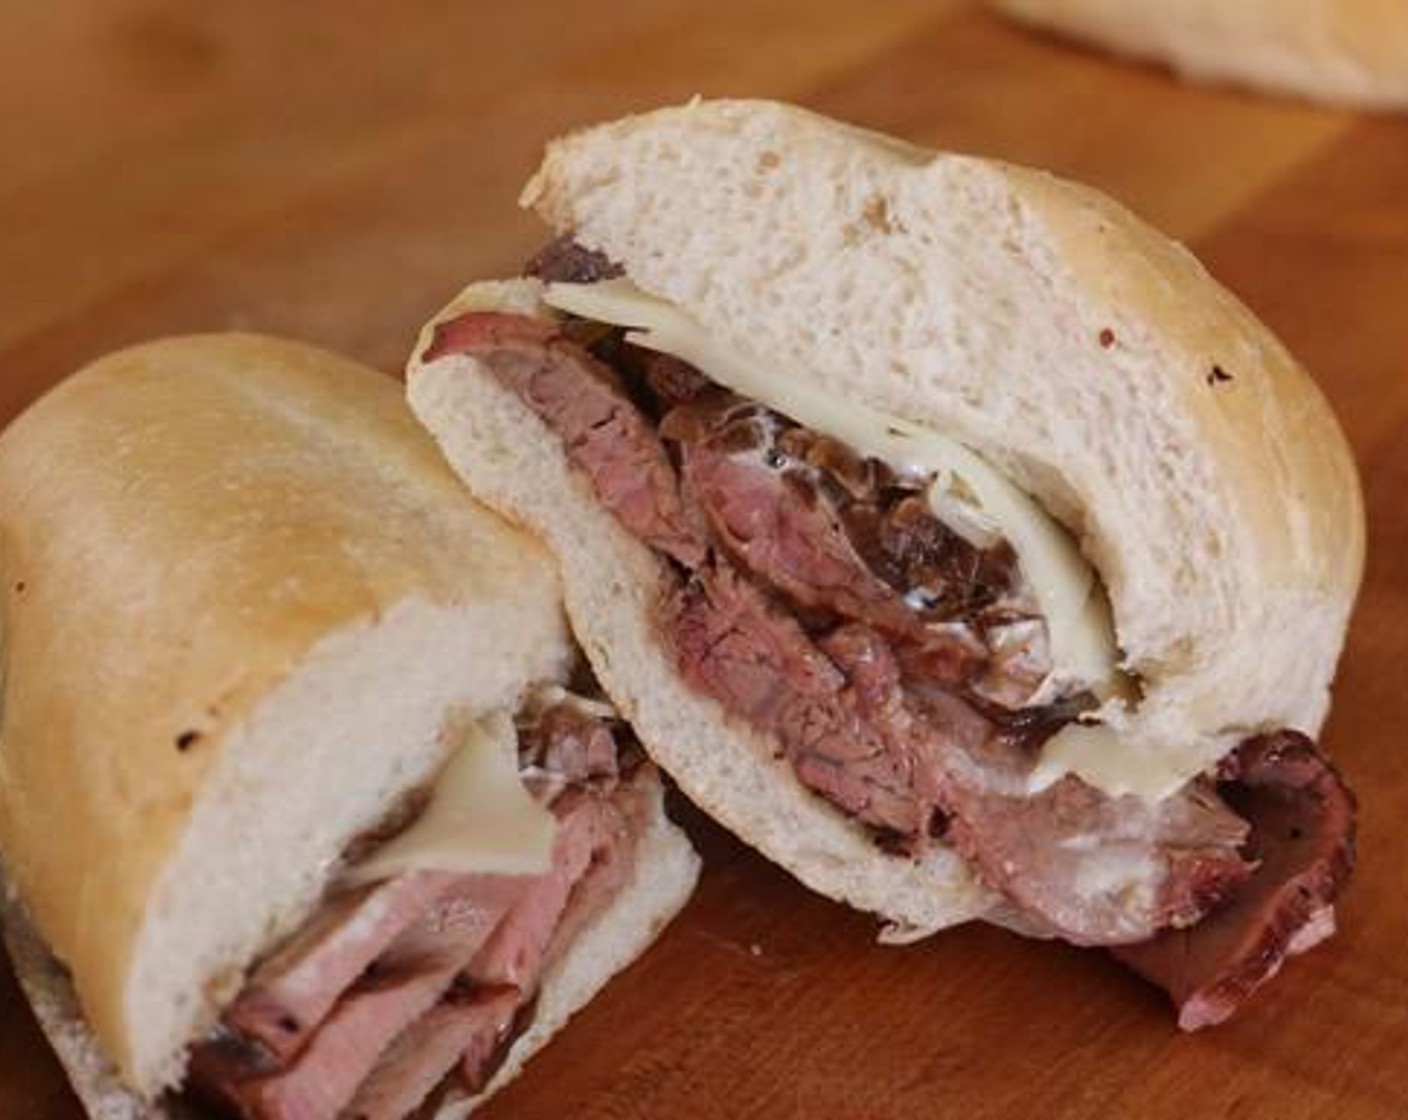 Smoked French Dip Sandwich